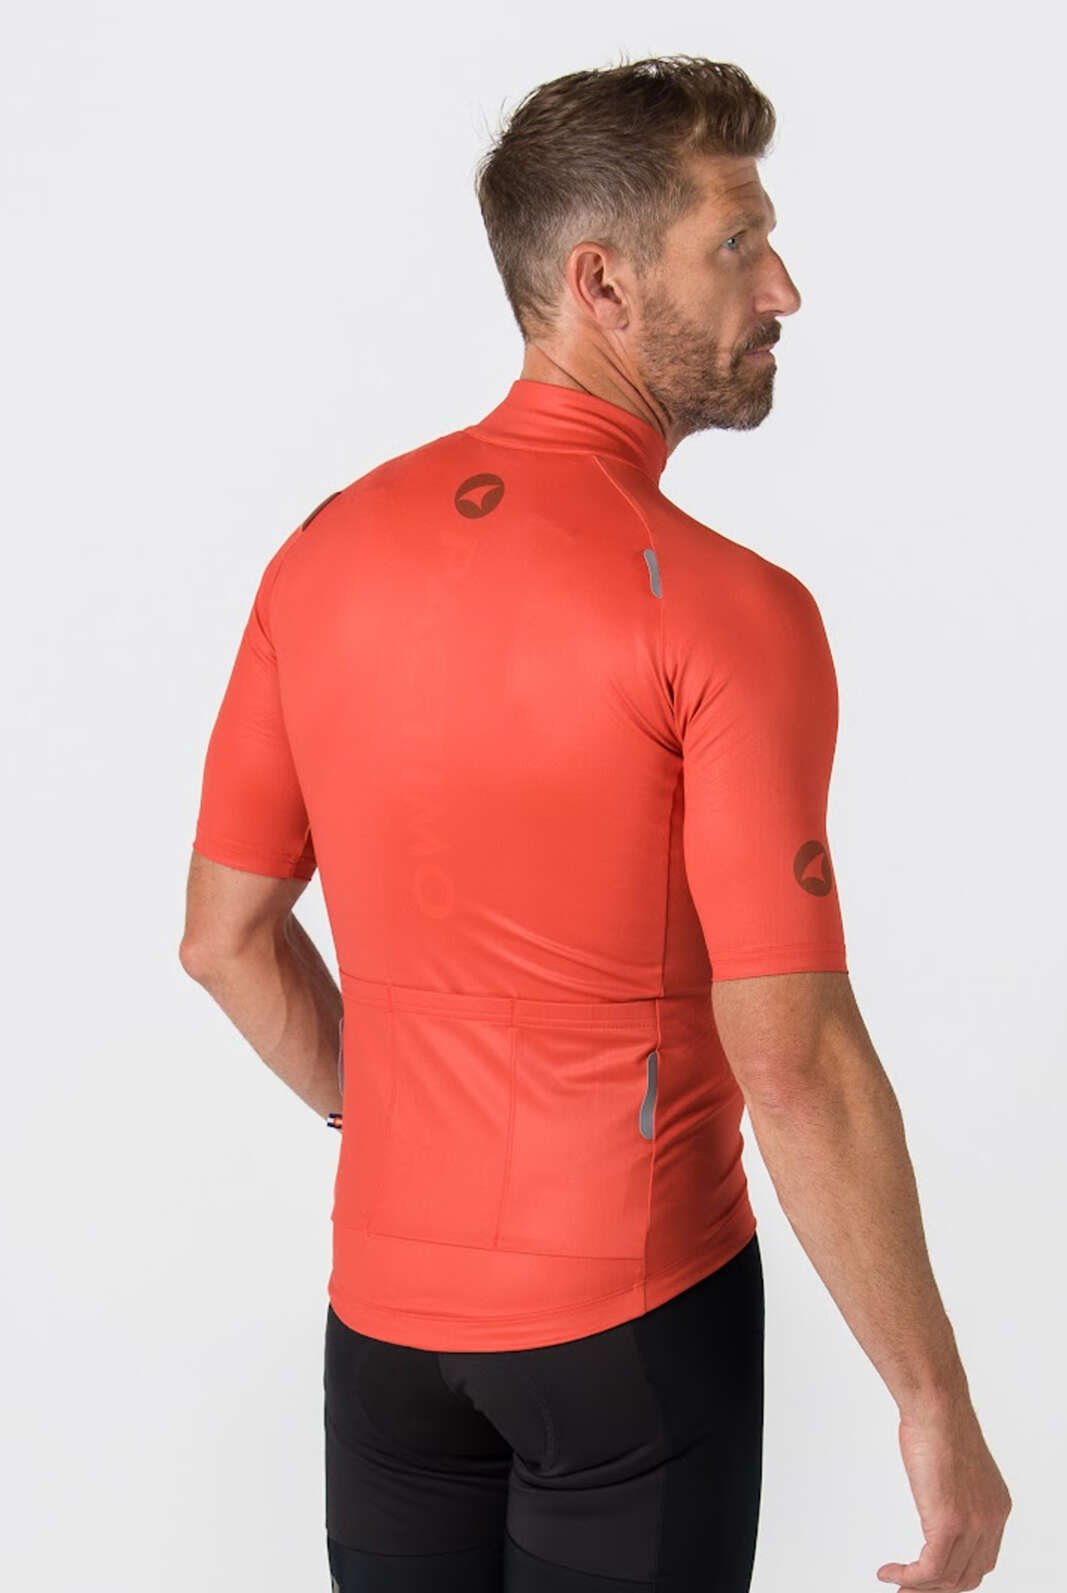 Men's Red Water Resistant Cycling Jersey - Back View